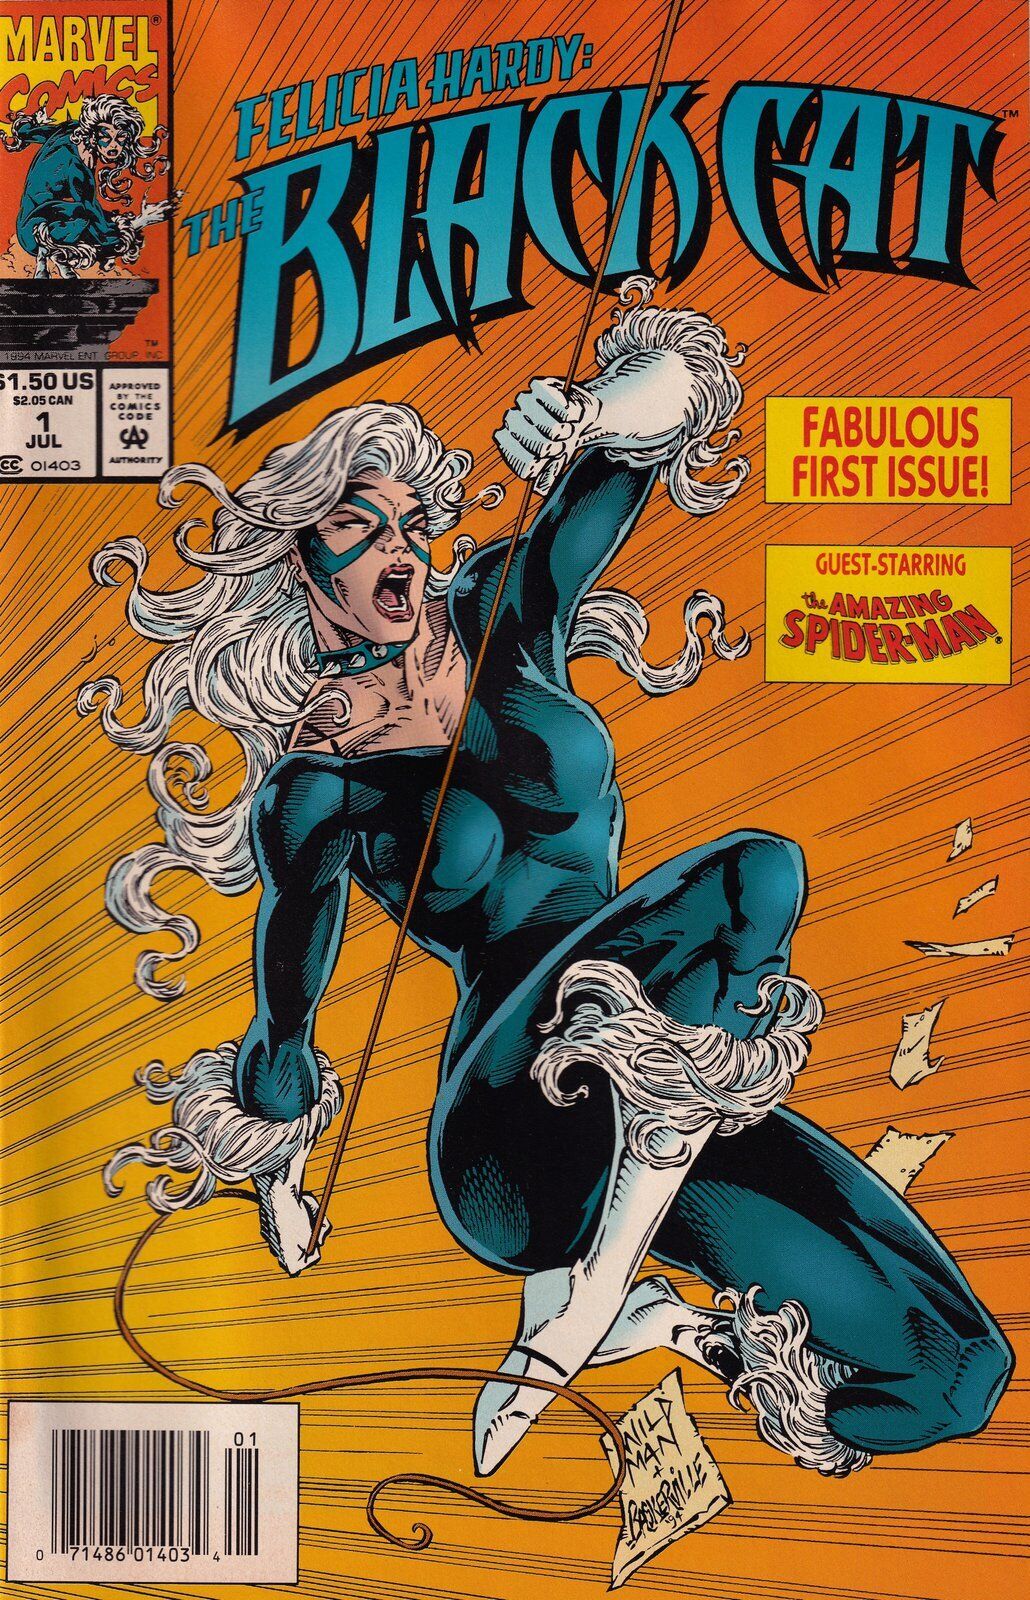 Felicia Hardy: The Black Cat #1 Newsstand Cover (1994) Marvel